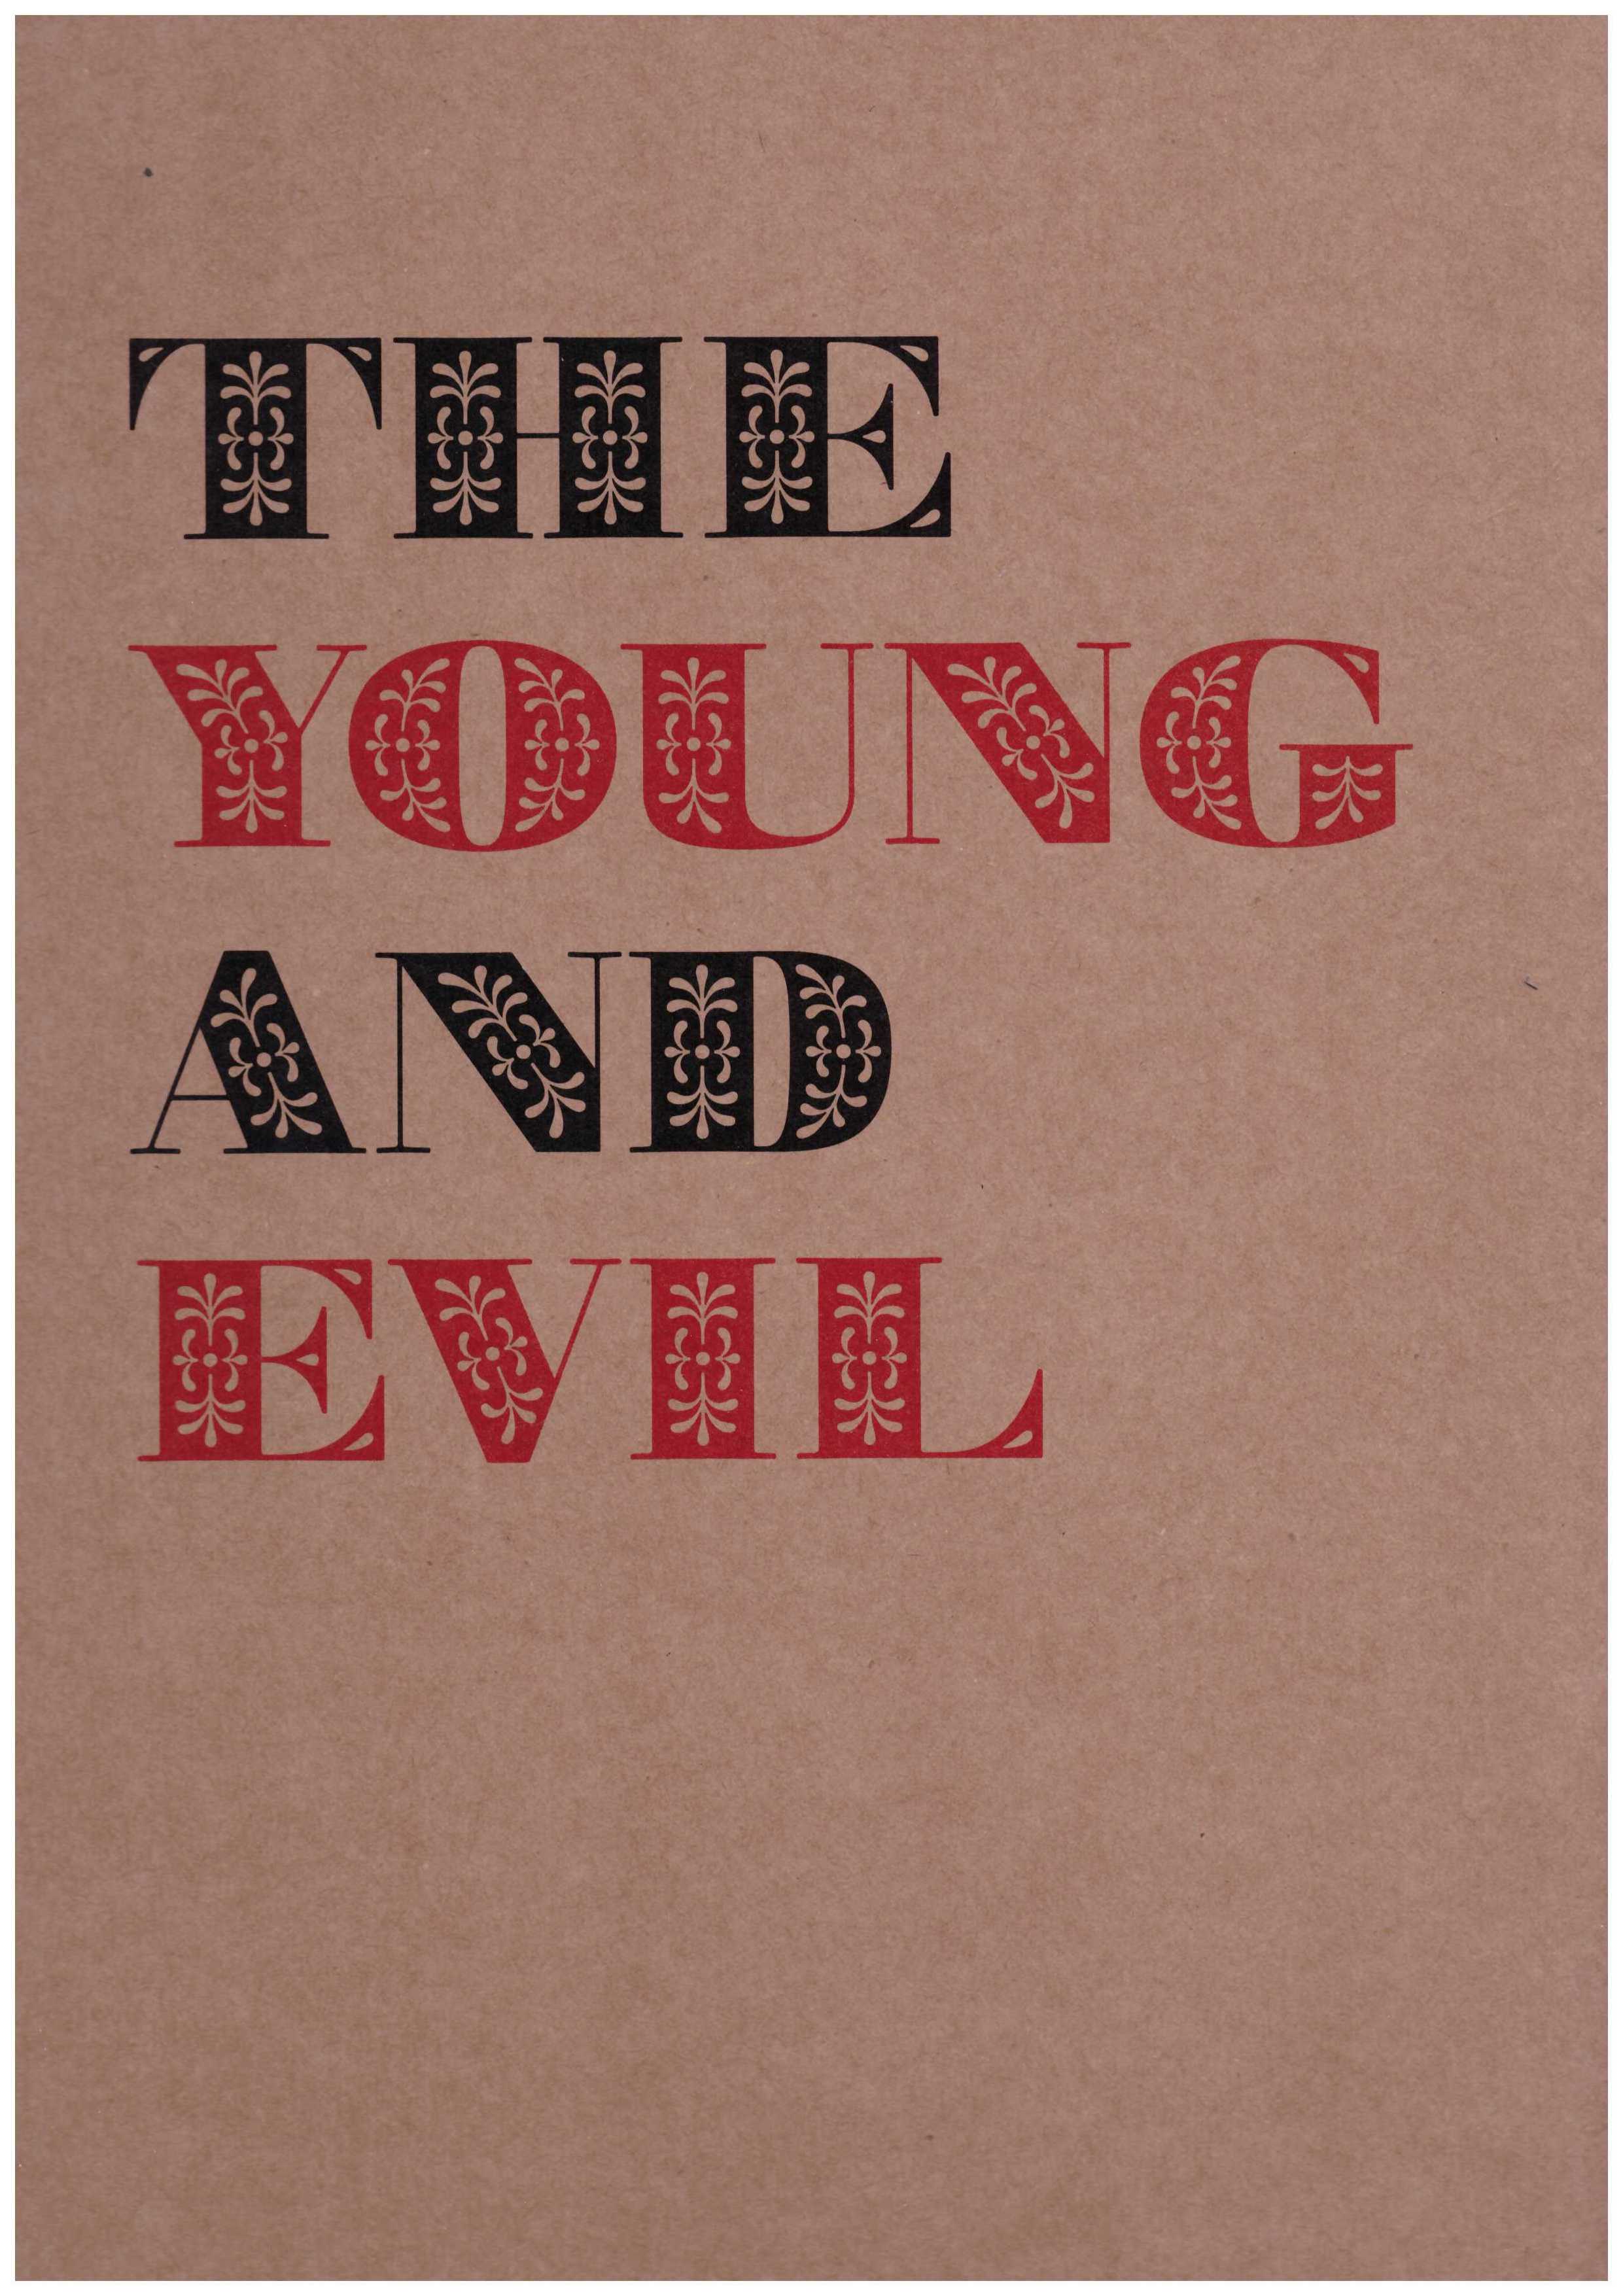 EARNEST, Jarrett (ed.) - The Young and Evil. Queer modernism in New York